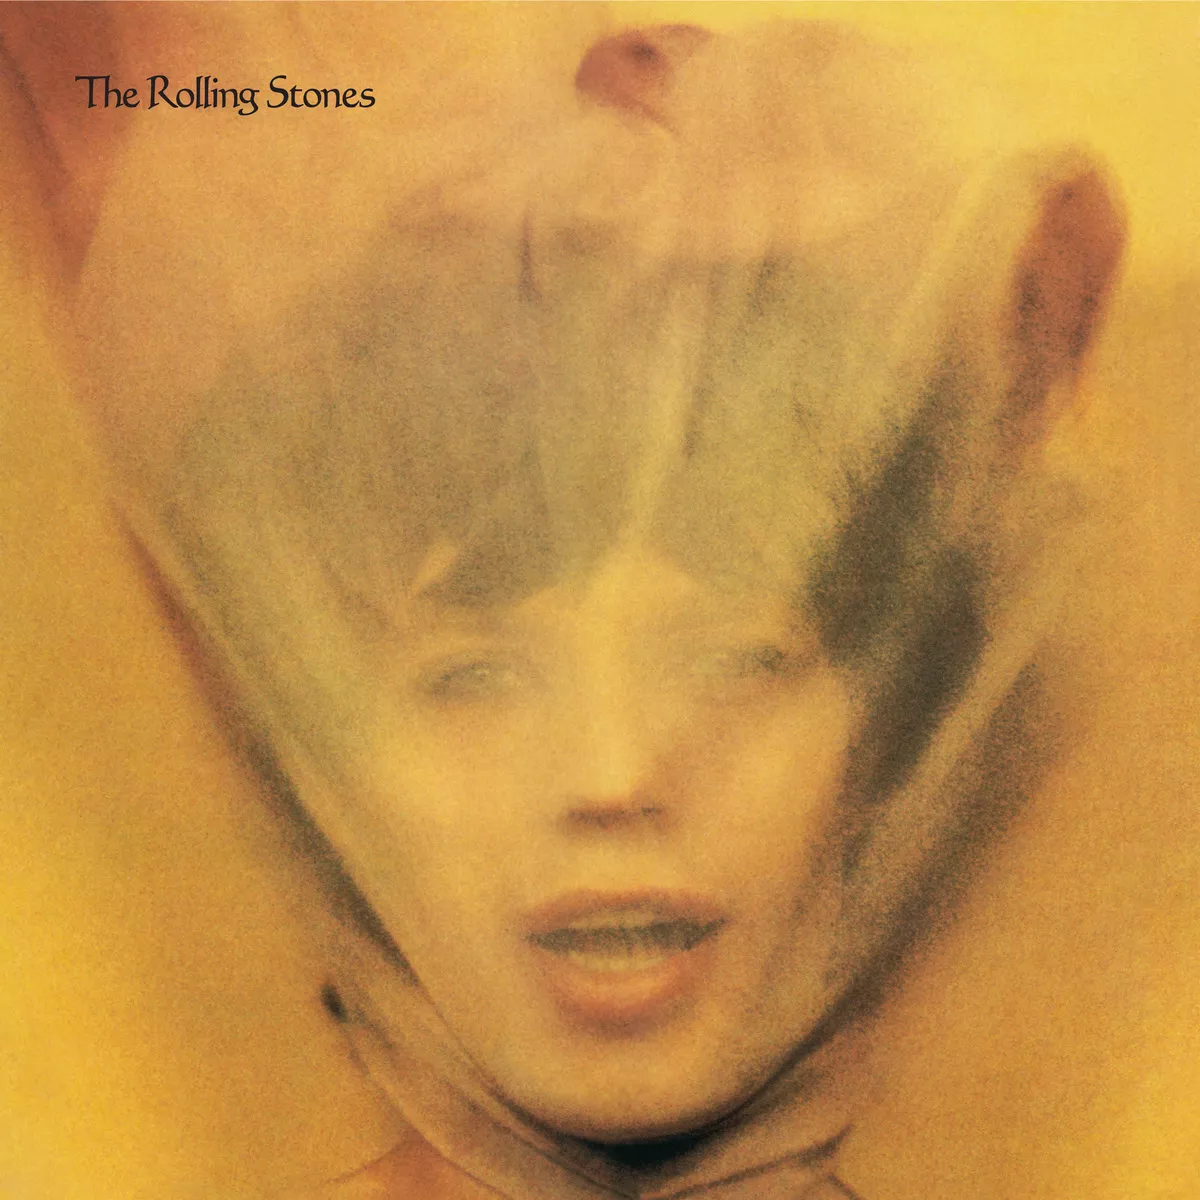 Goats Head Soup - The Rolling Stones